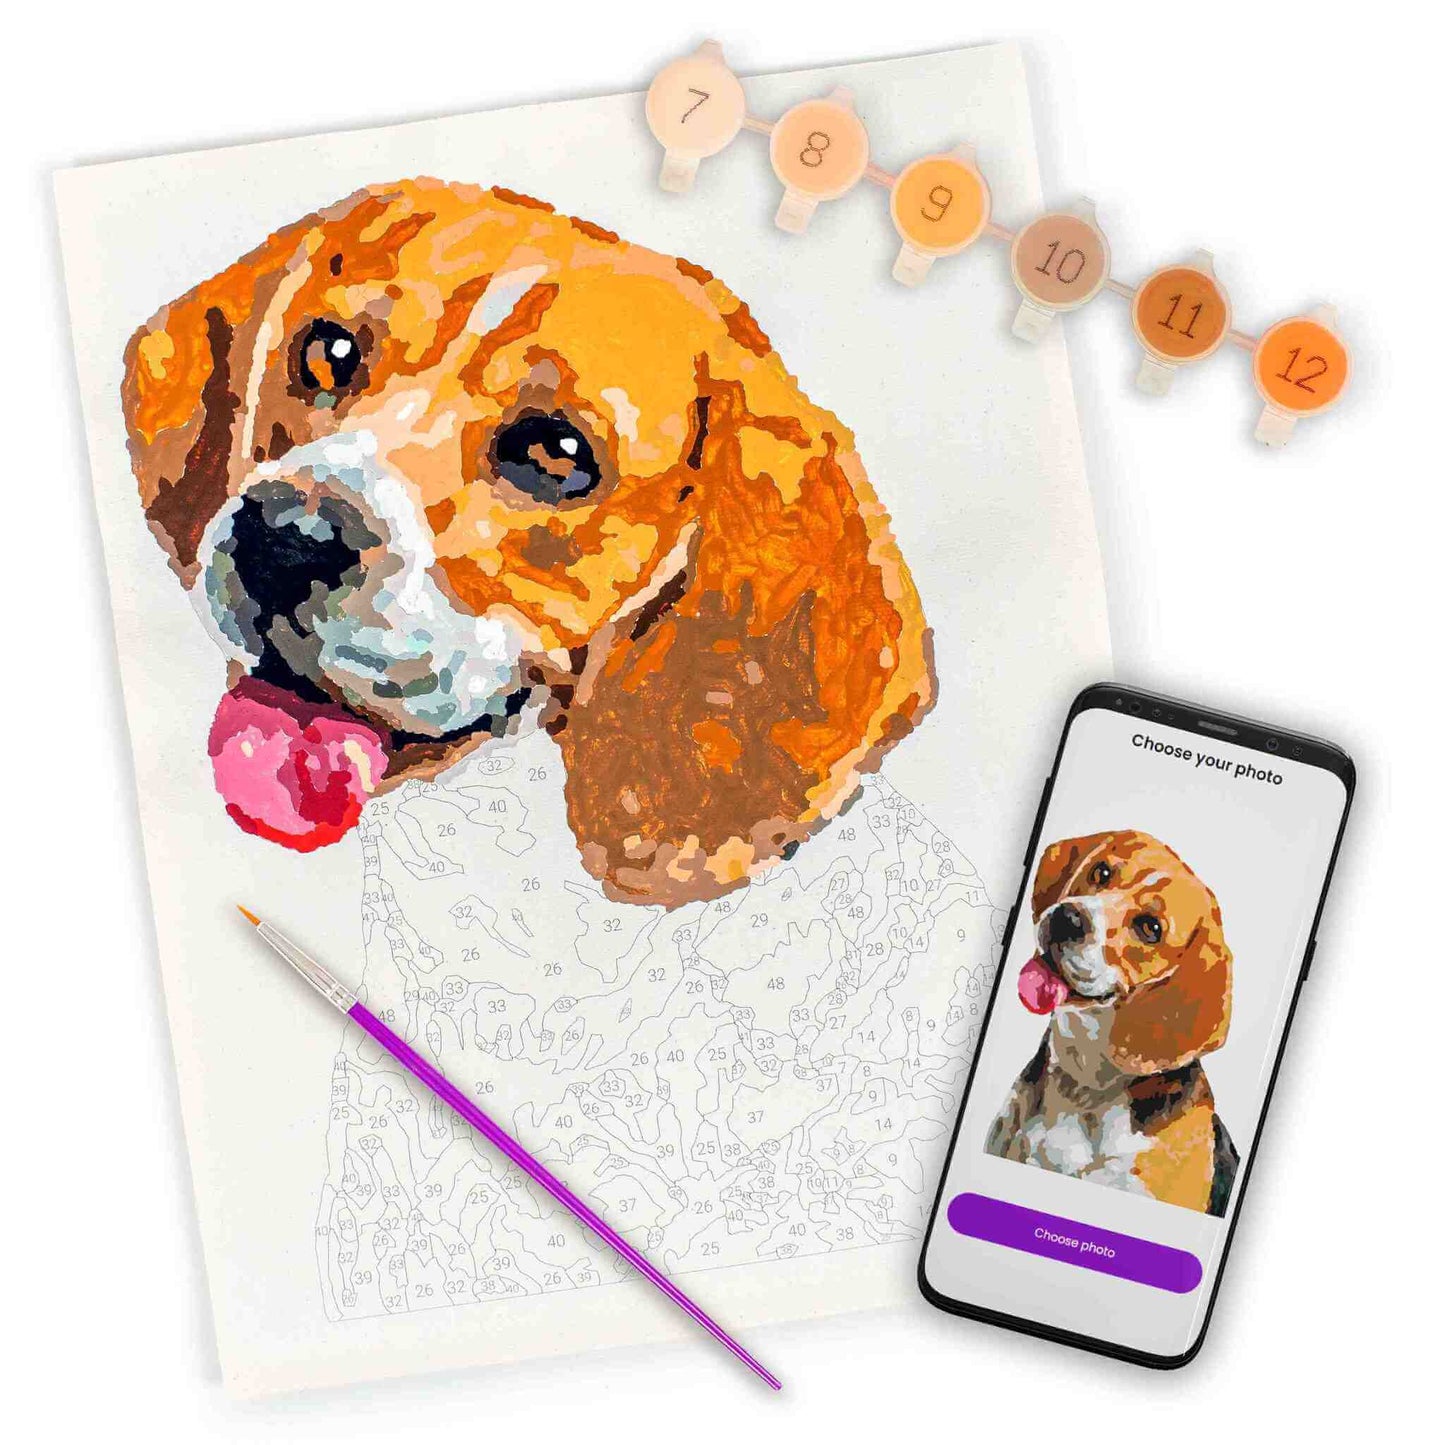 A partially painted custom paint by number canvas of a dog alongside paint pots labeled with numbers 7 through 12. A purple paintbrush rests on the canvas, and a smartphone shows the reference painting preview of the dog with a 'Choose photo' button.